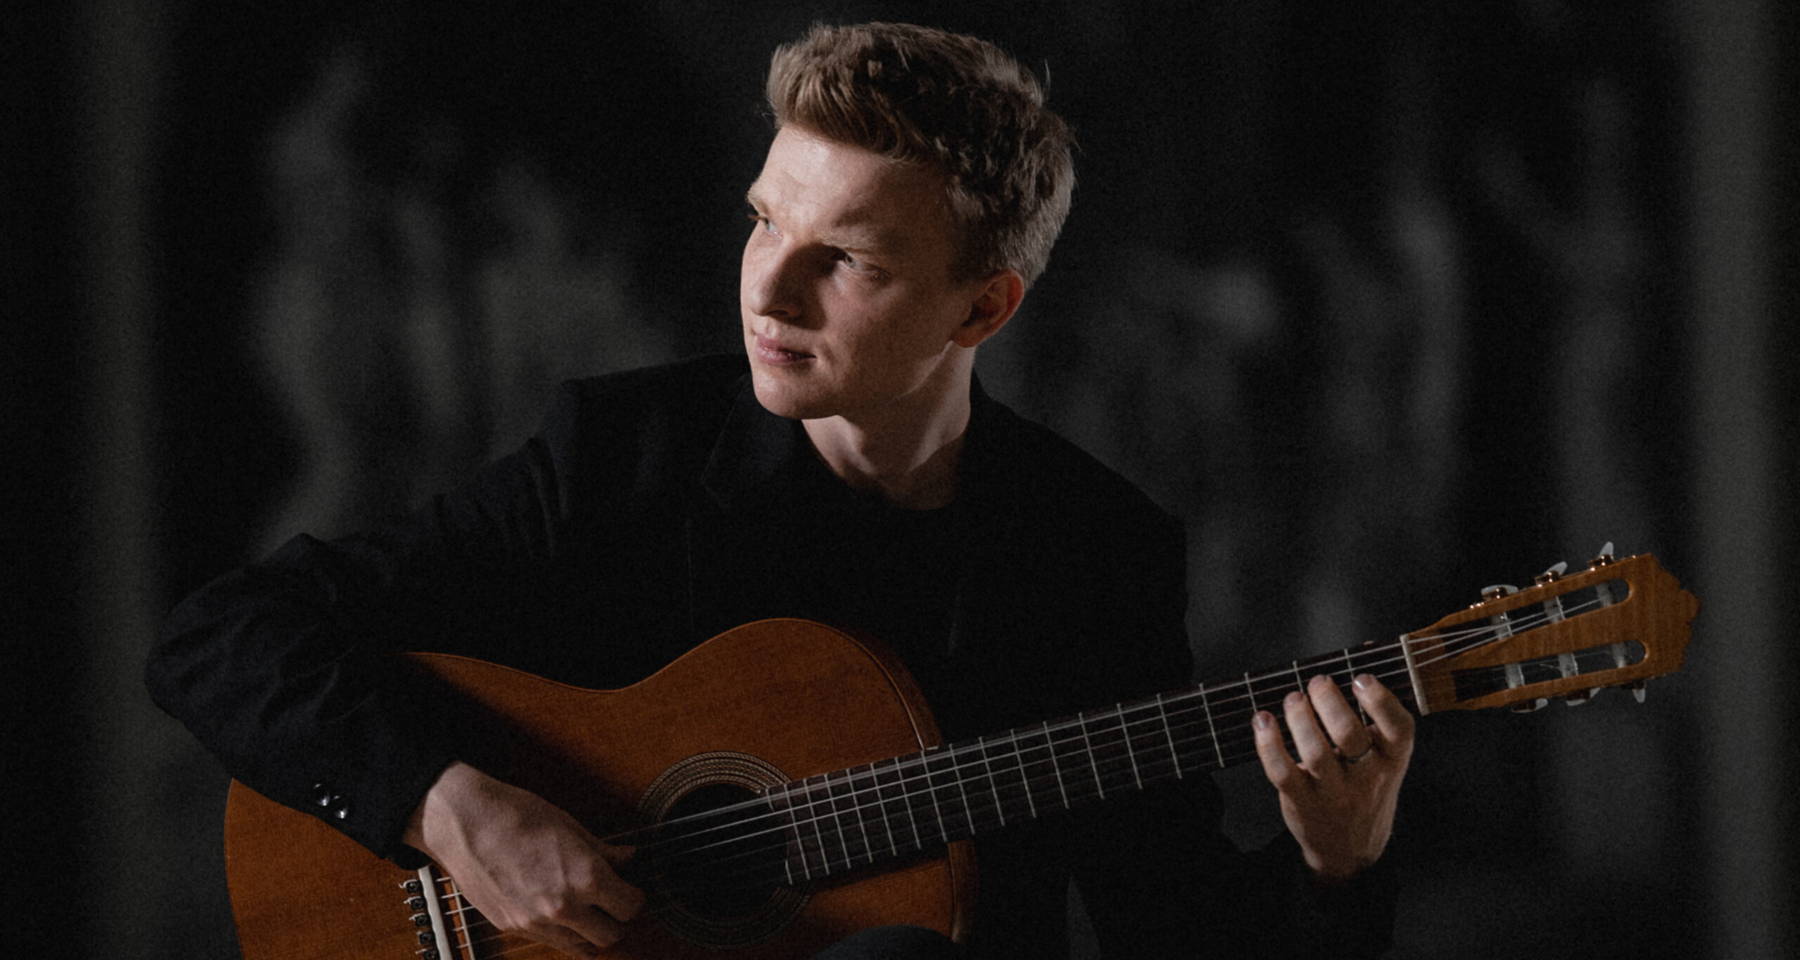 OMNI Foundation for the Performing Arts Presents: Mateusz Kowalski, guitar